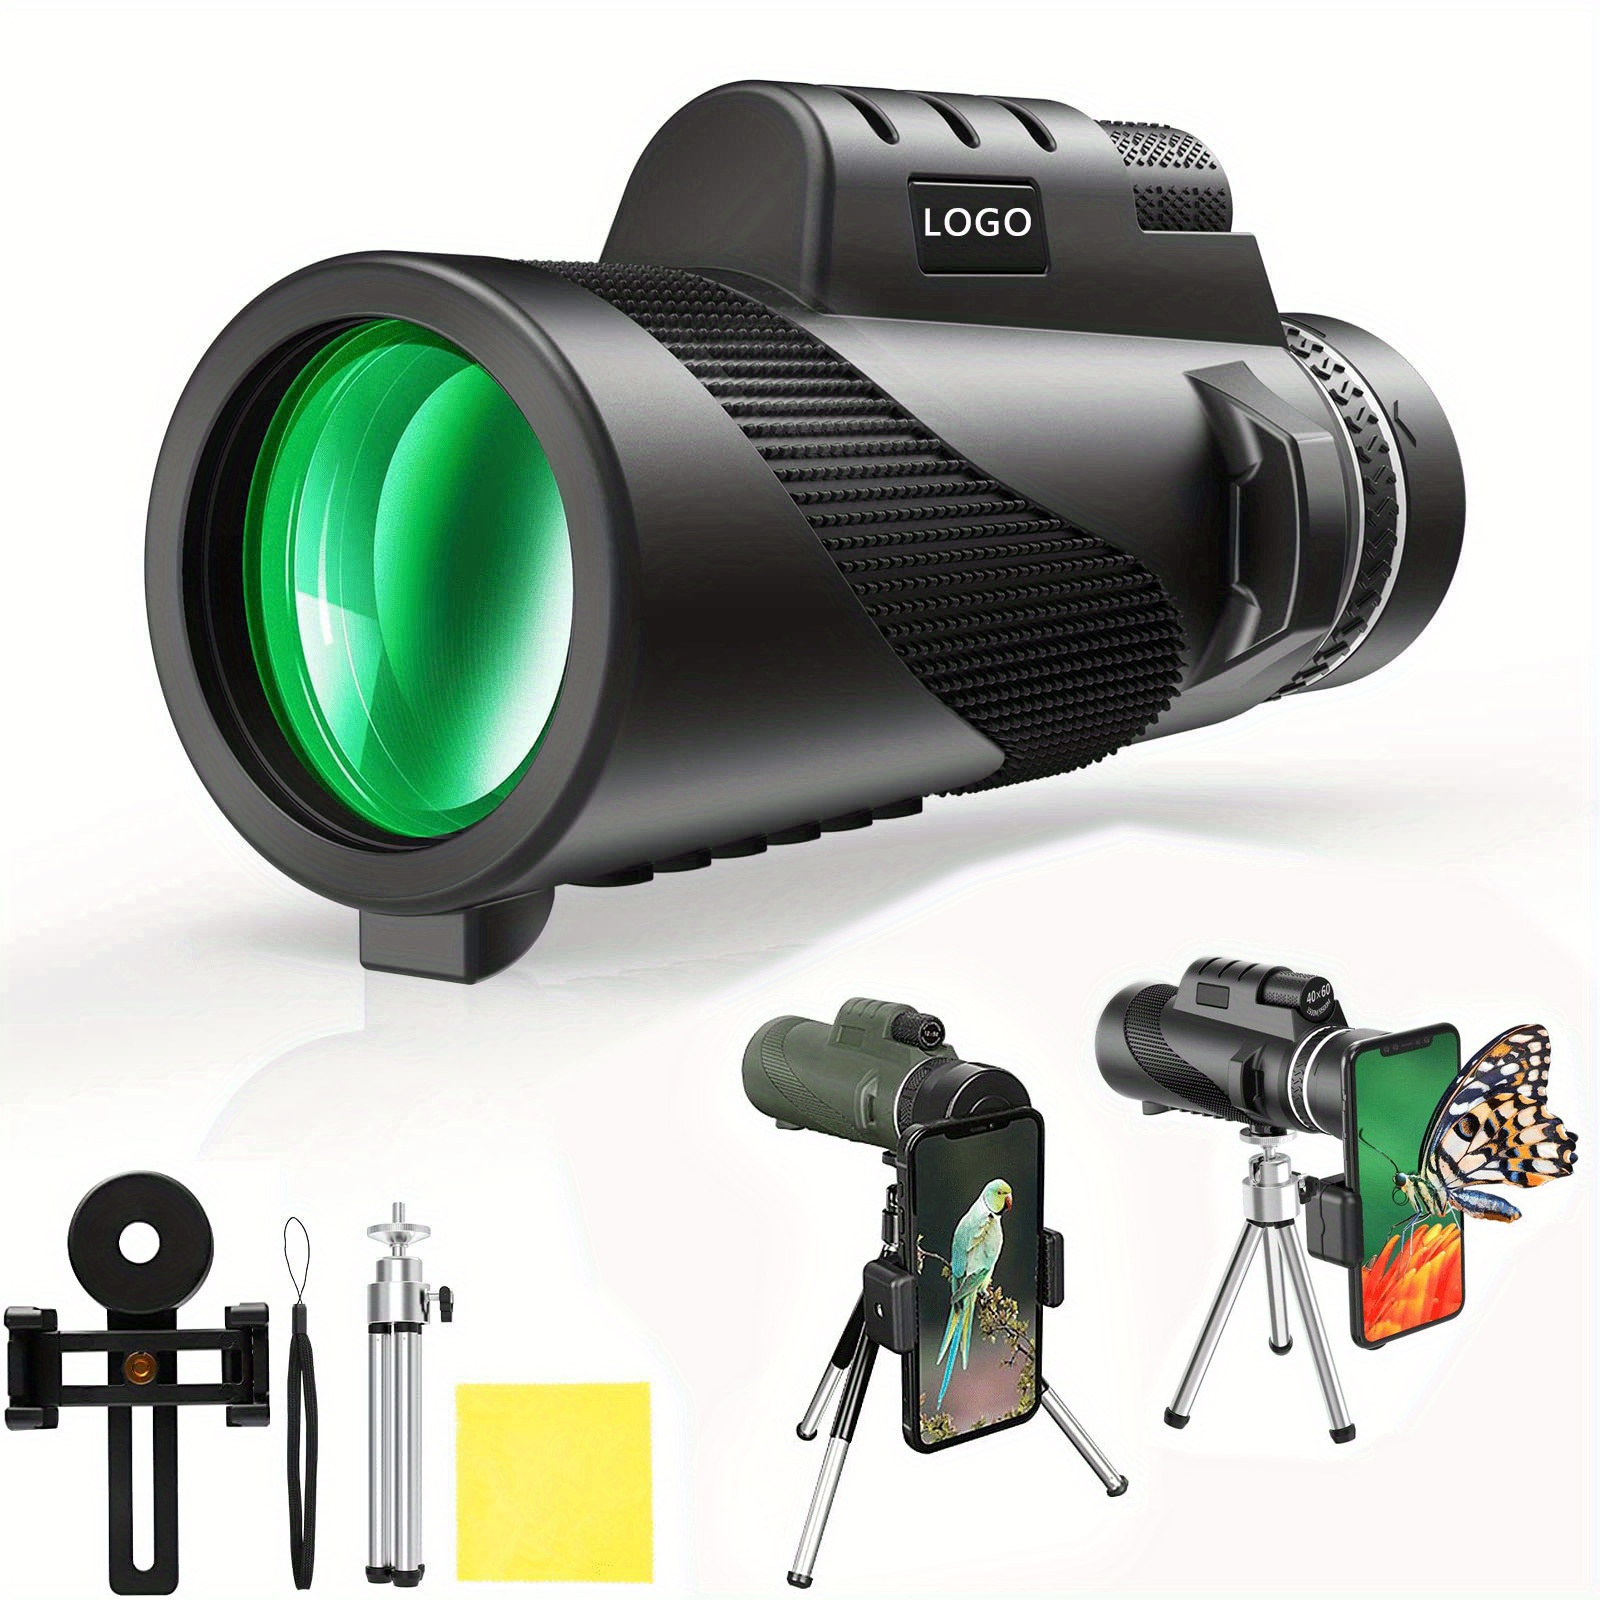 

1pc High Definition Monocular Telescope: Zoom Long-range & Capture Stunning Views With Tripod & Phone Clip - Perfect For Outdoor Adventures!